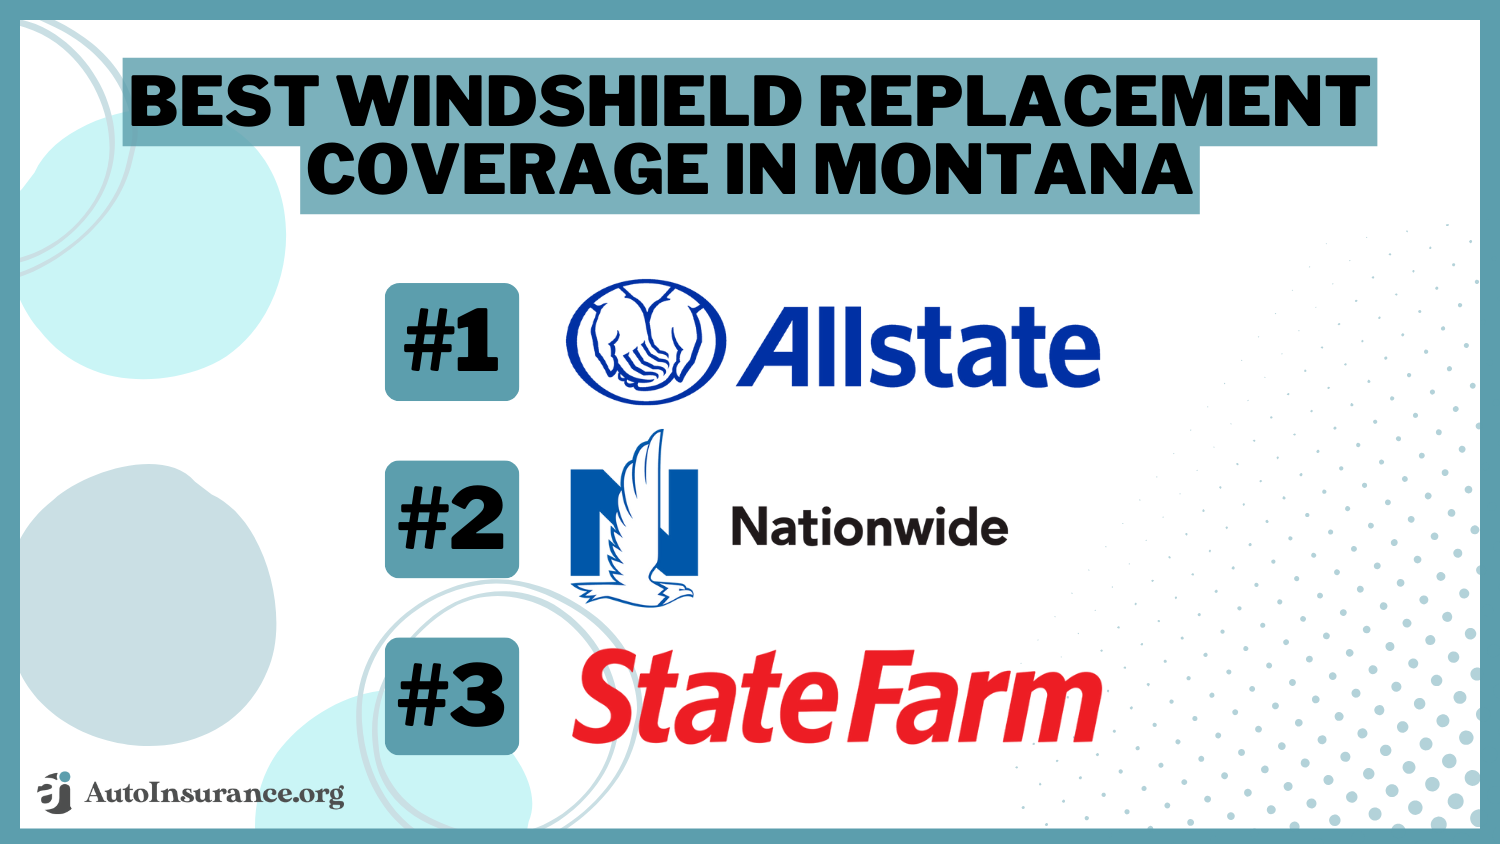 Best Windshield Replacement Coverage in Montana: Allstate, Nationwide, and State Farm